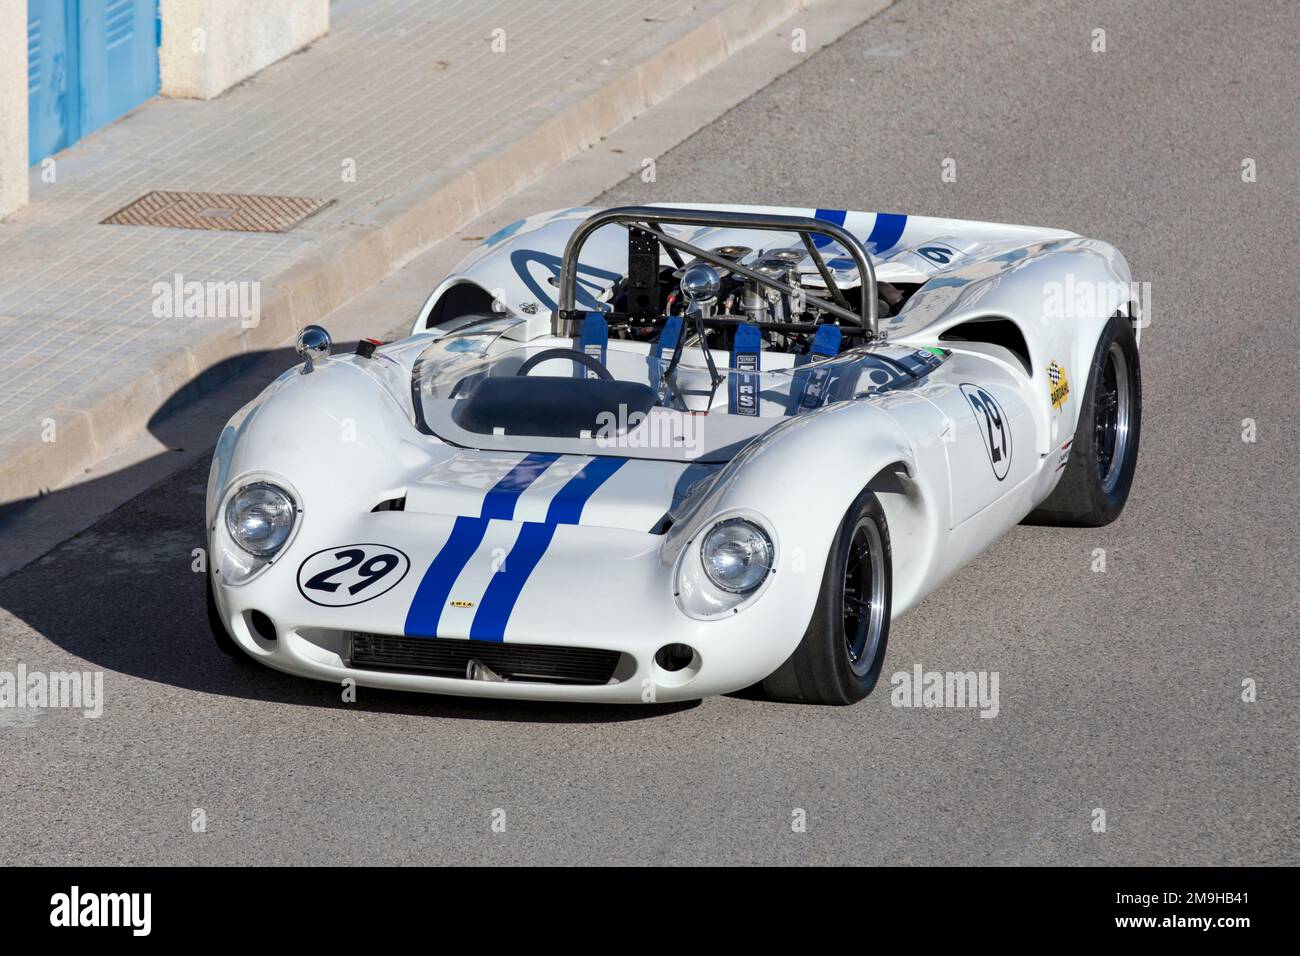 Front view of Lola T70 MkII Spyder sports car Stock Photo